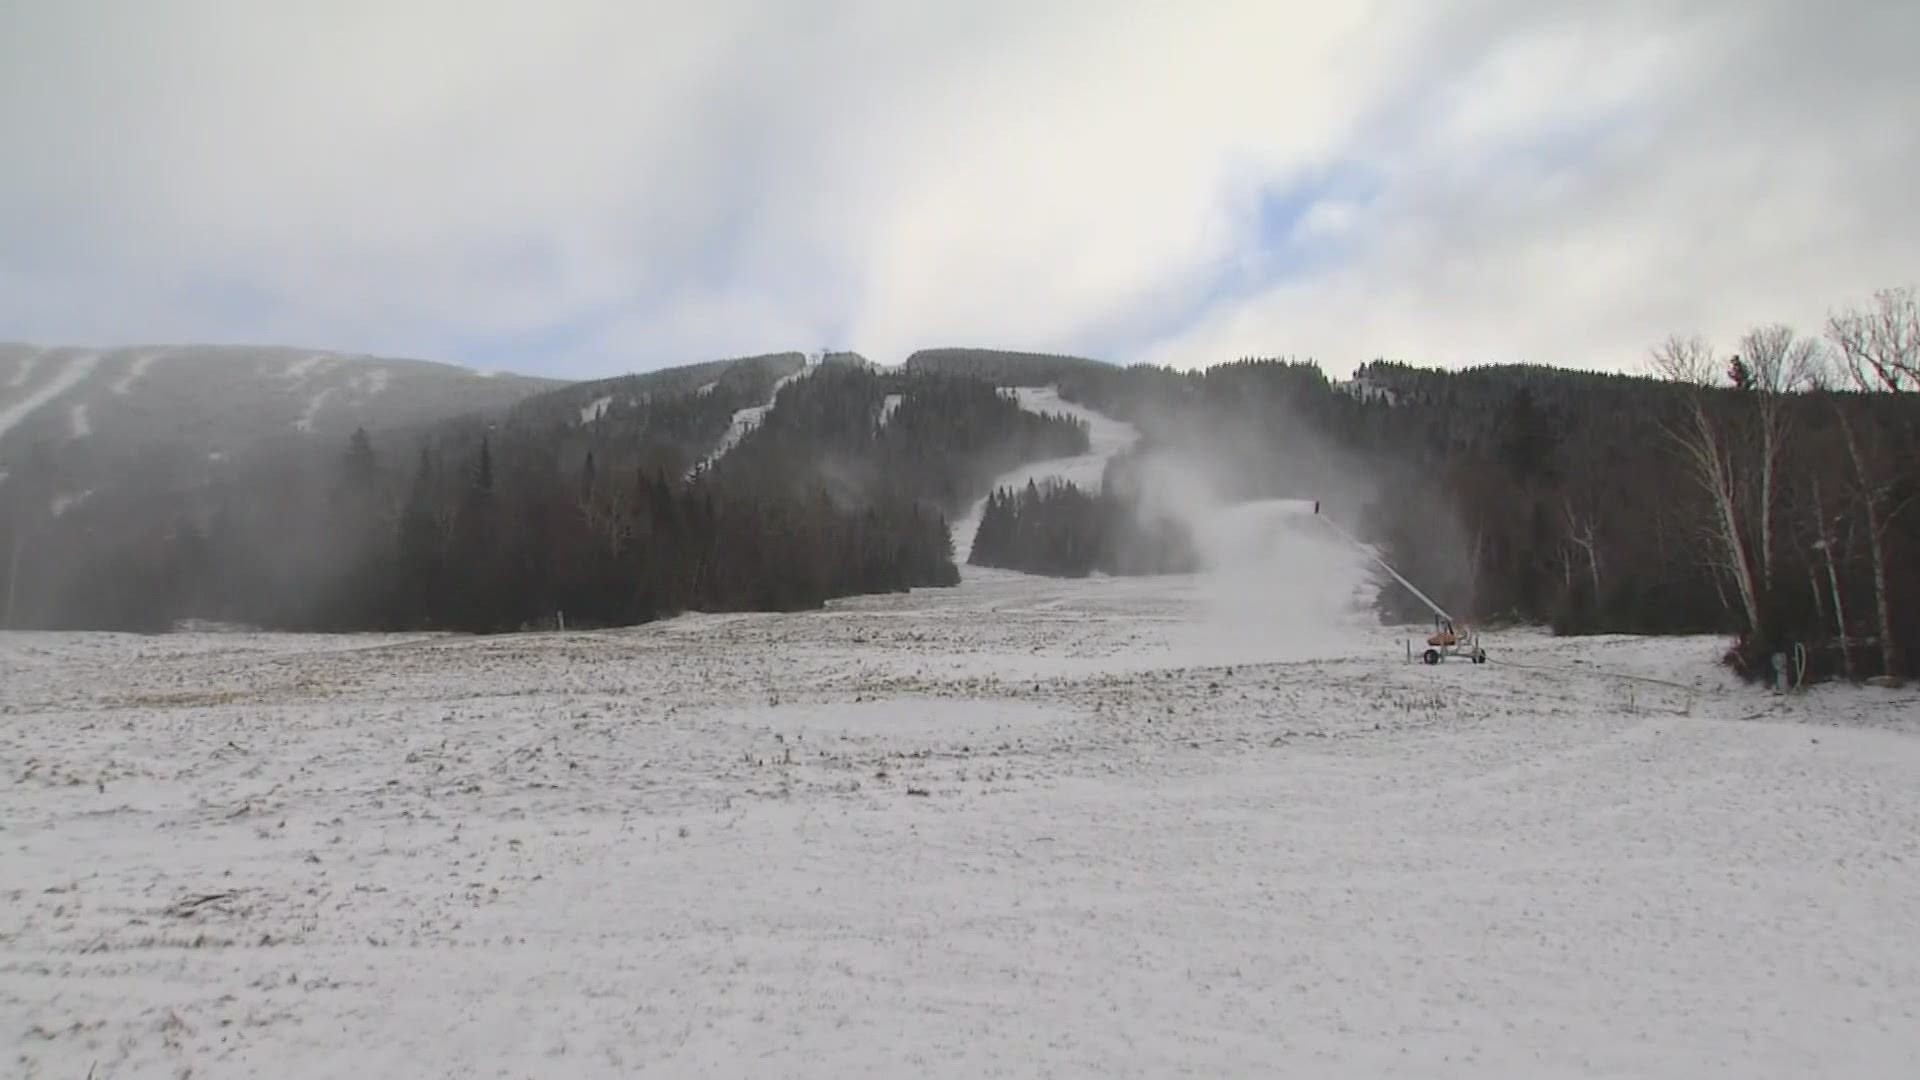 The ski area has added a high-speed quad chair lift and new snowmaking guns, remodeled the lodge, and more to get the mountain ready for reopening.